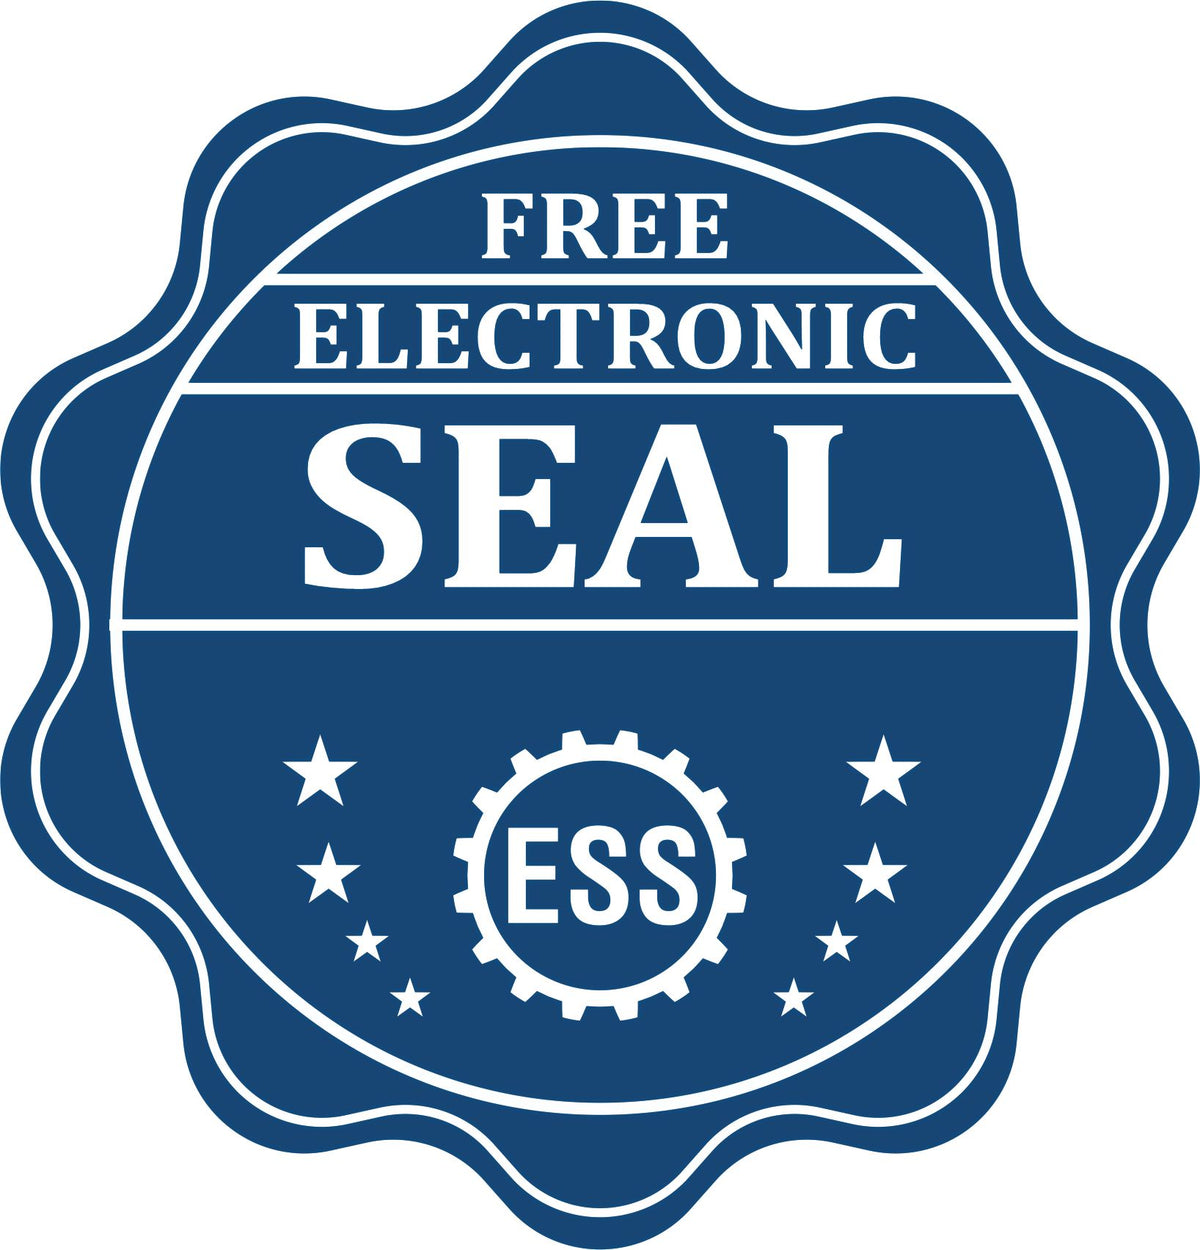 A badge showing a free electronic seal for the Soft Connecticut Professional Engineer Seal with stars and the ESS gear on the emblem.